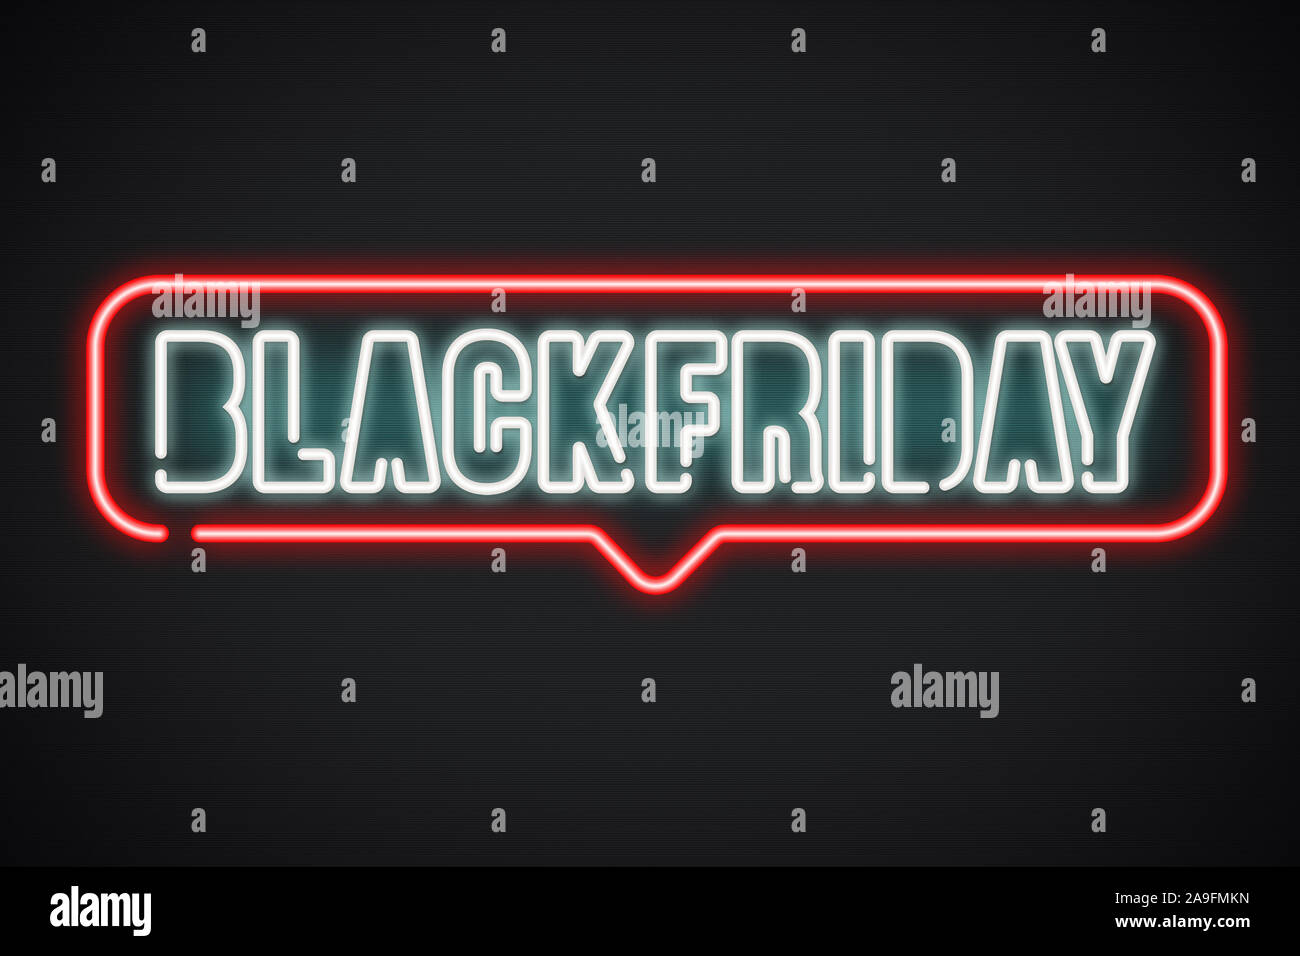 Black friday colorful neon shop sign on black background, sale and offers concept Stock Photo